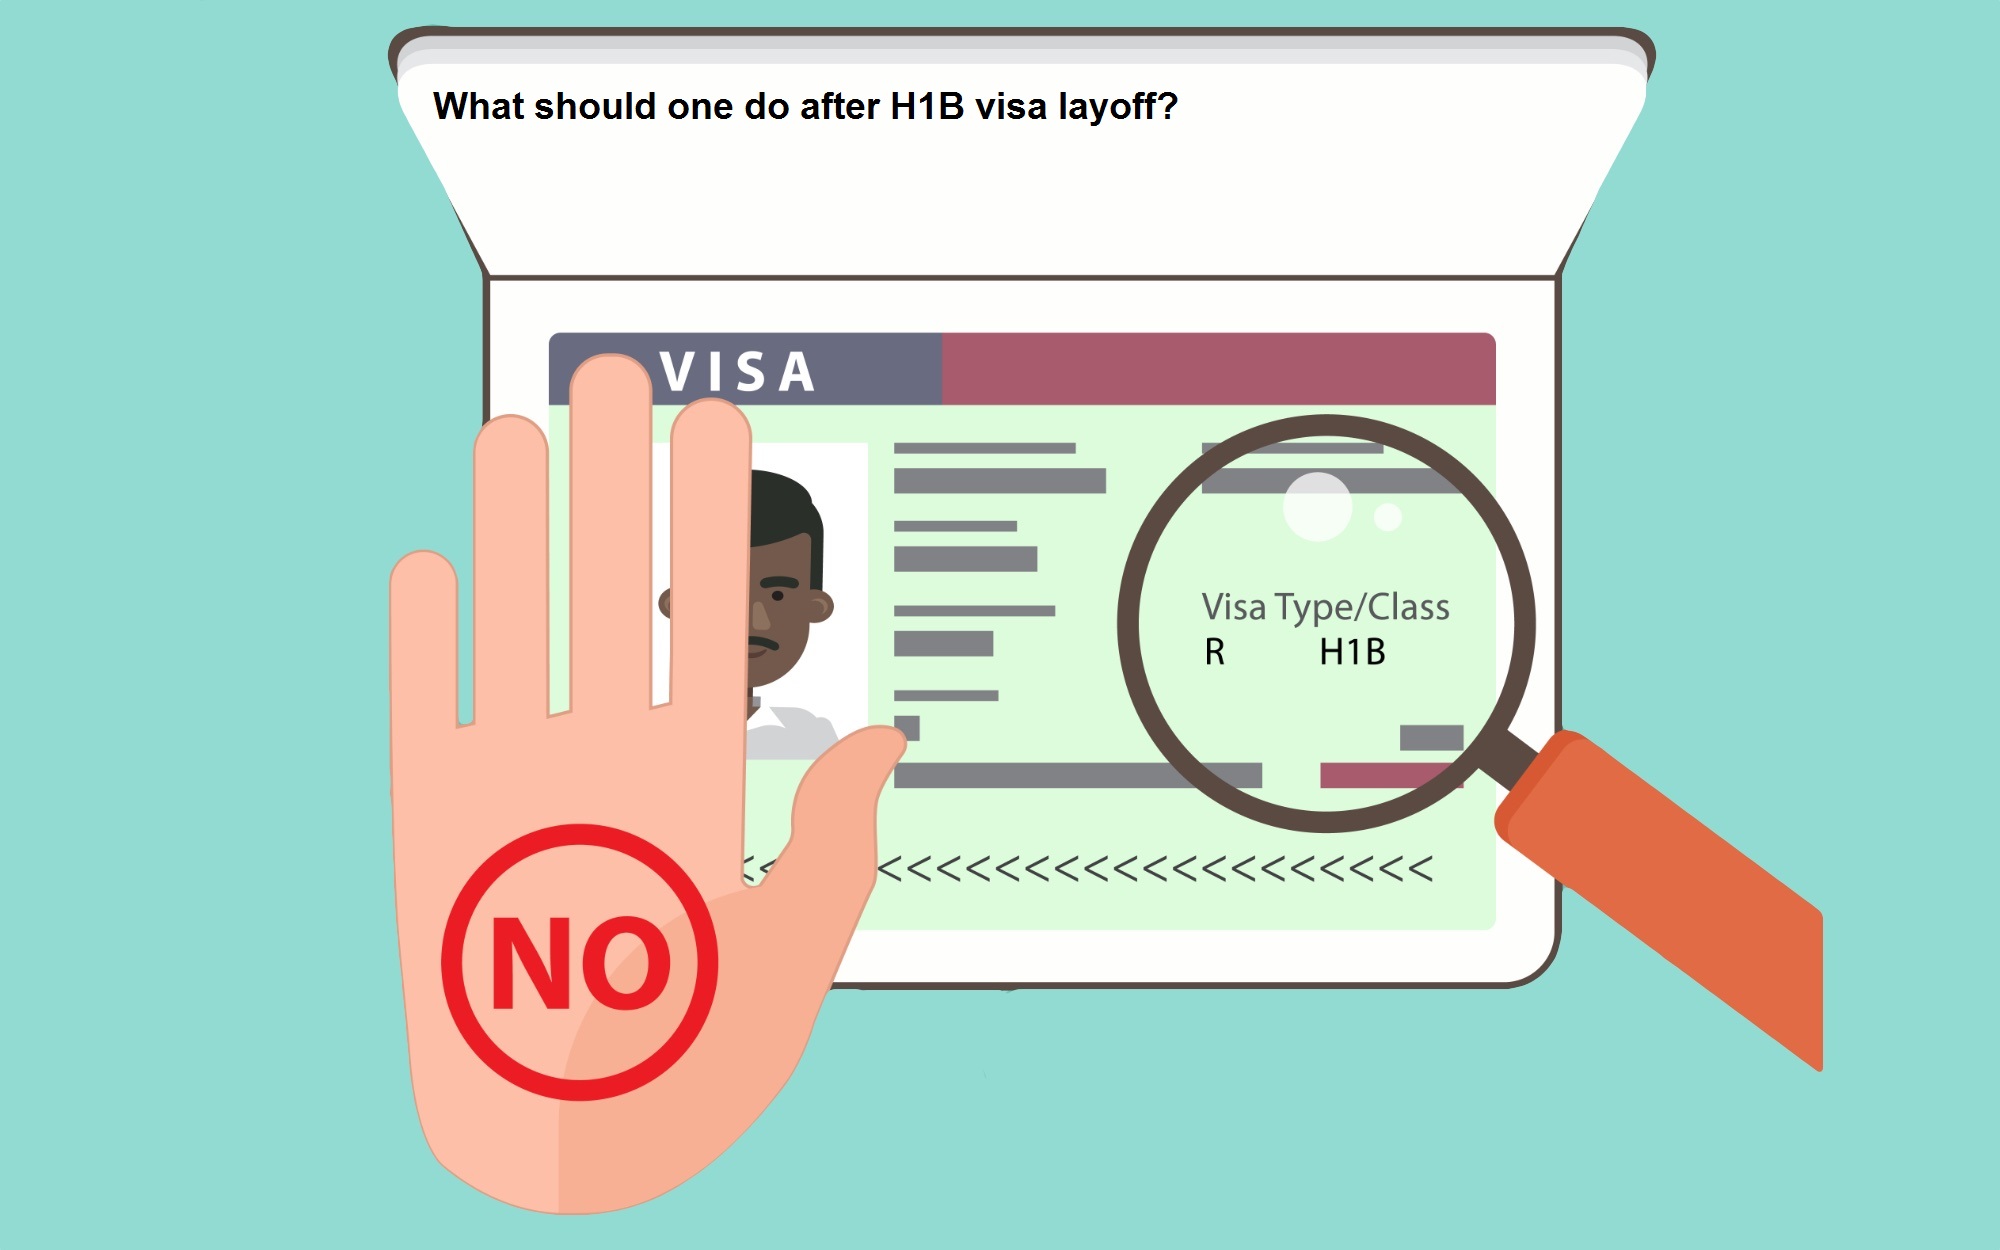 What should one do after H1B visa layoff?